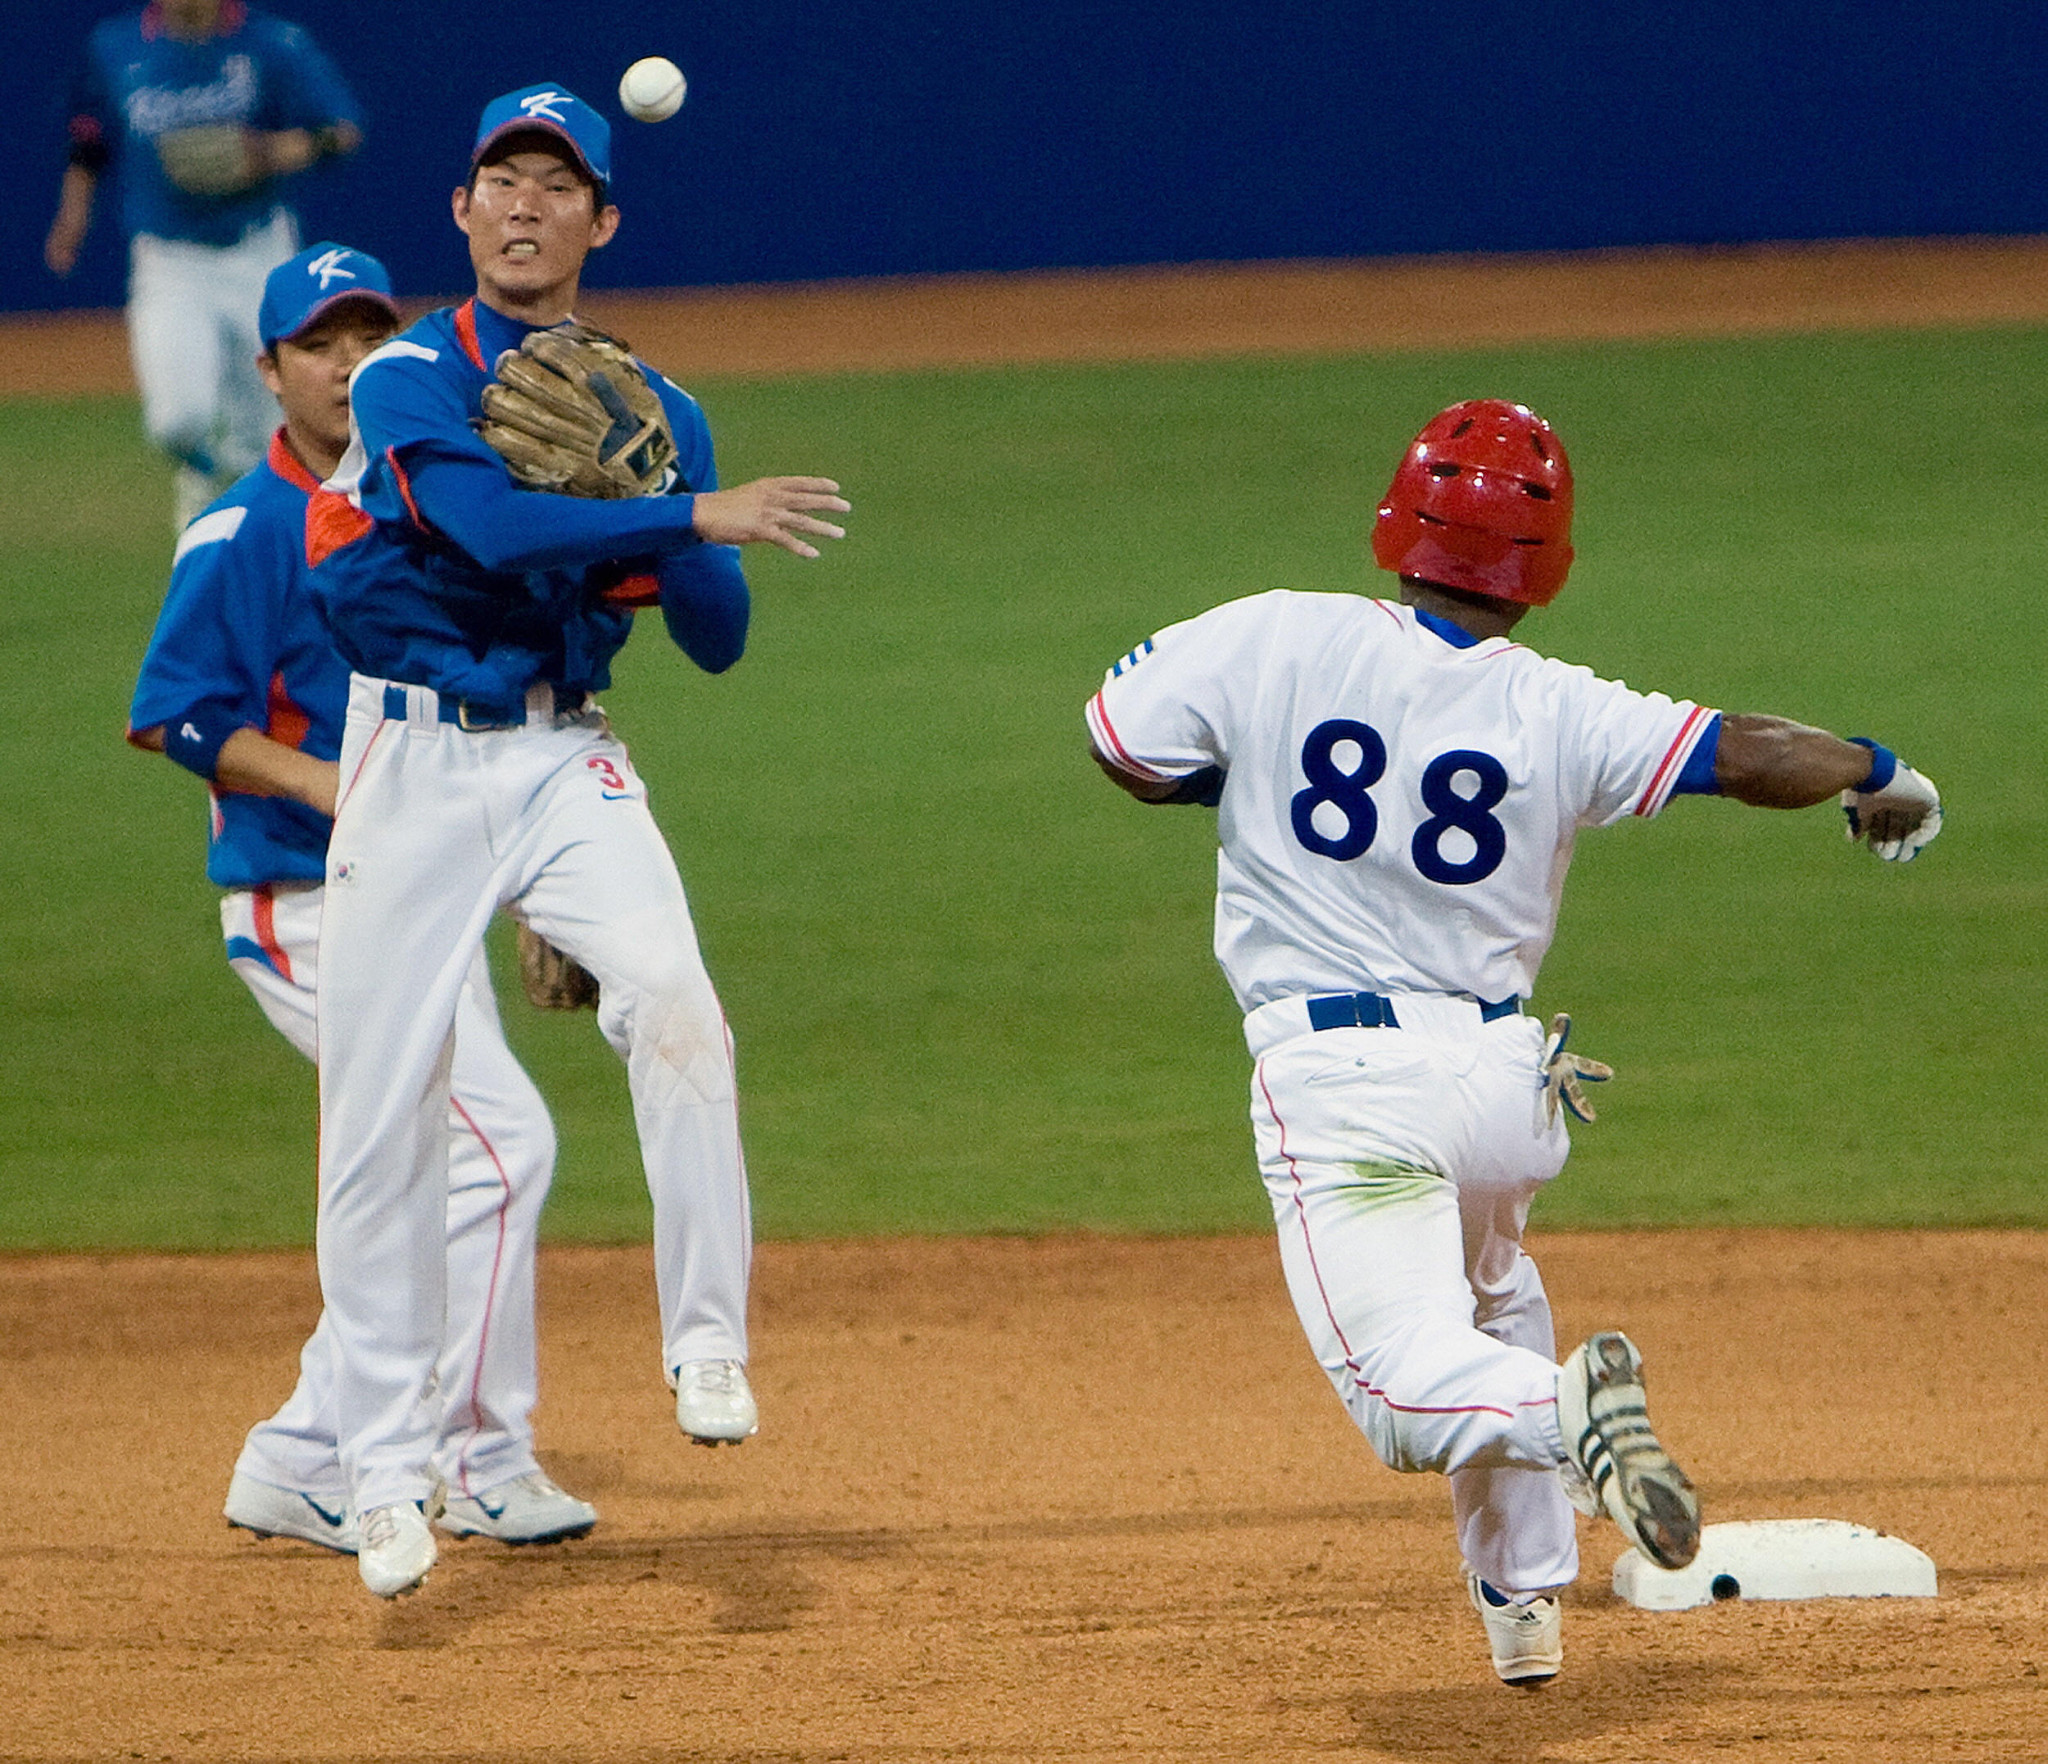 Baseball and softball were dropped from the Olympic programme after Beijing 2008 ©Getty Images